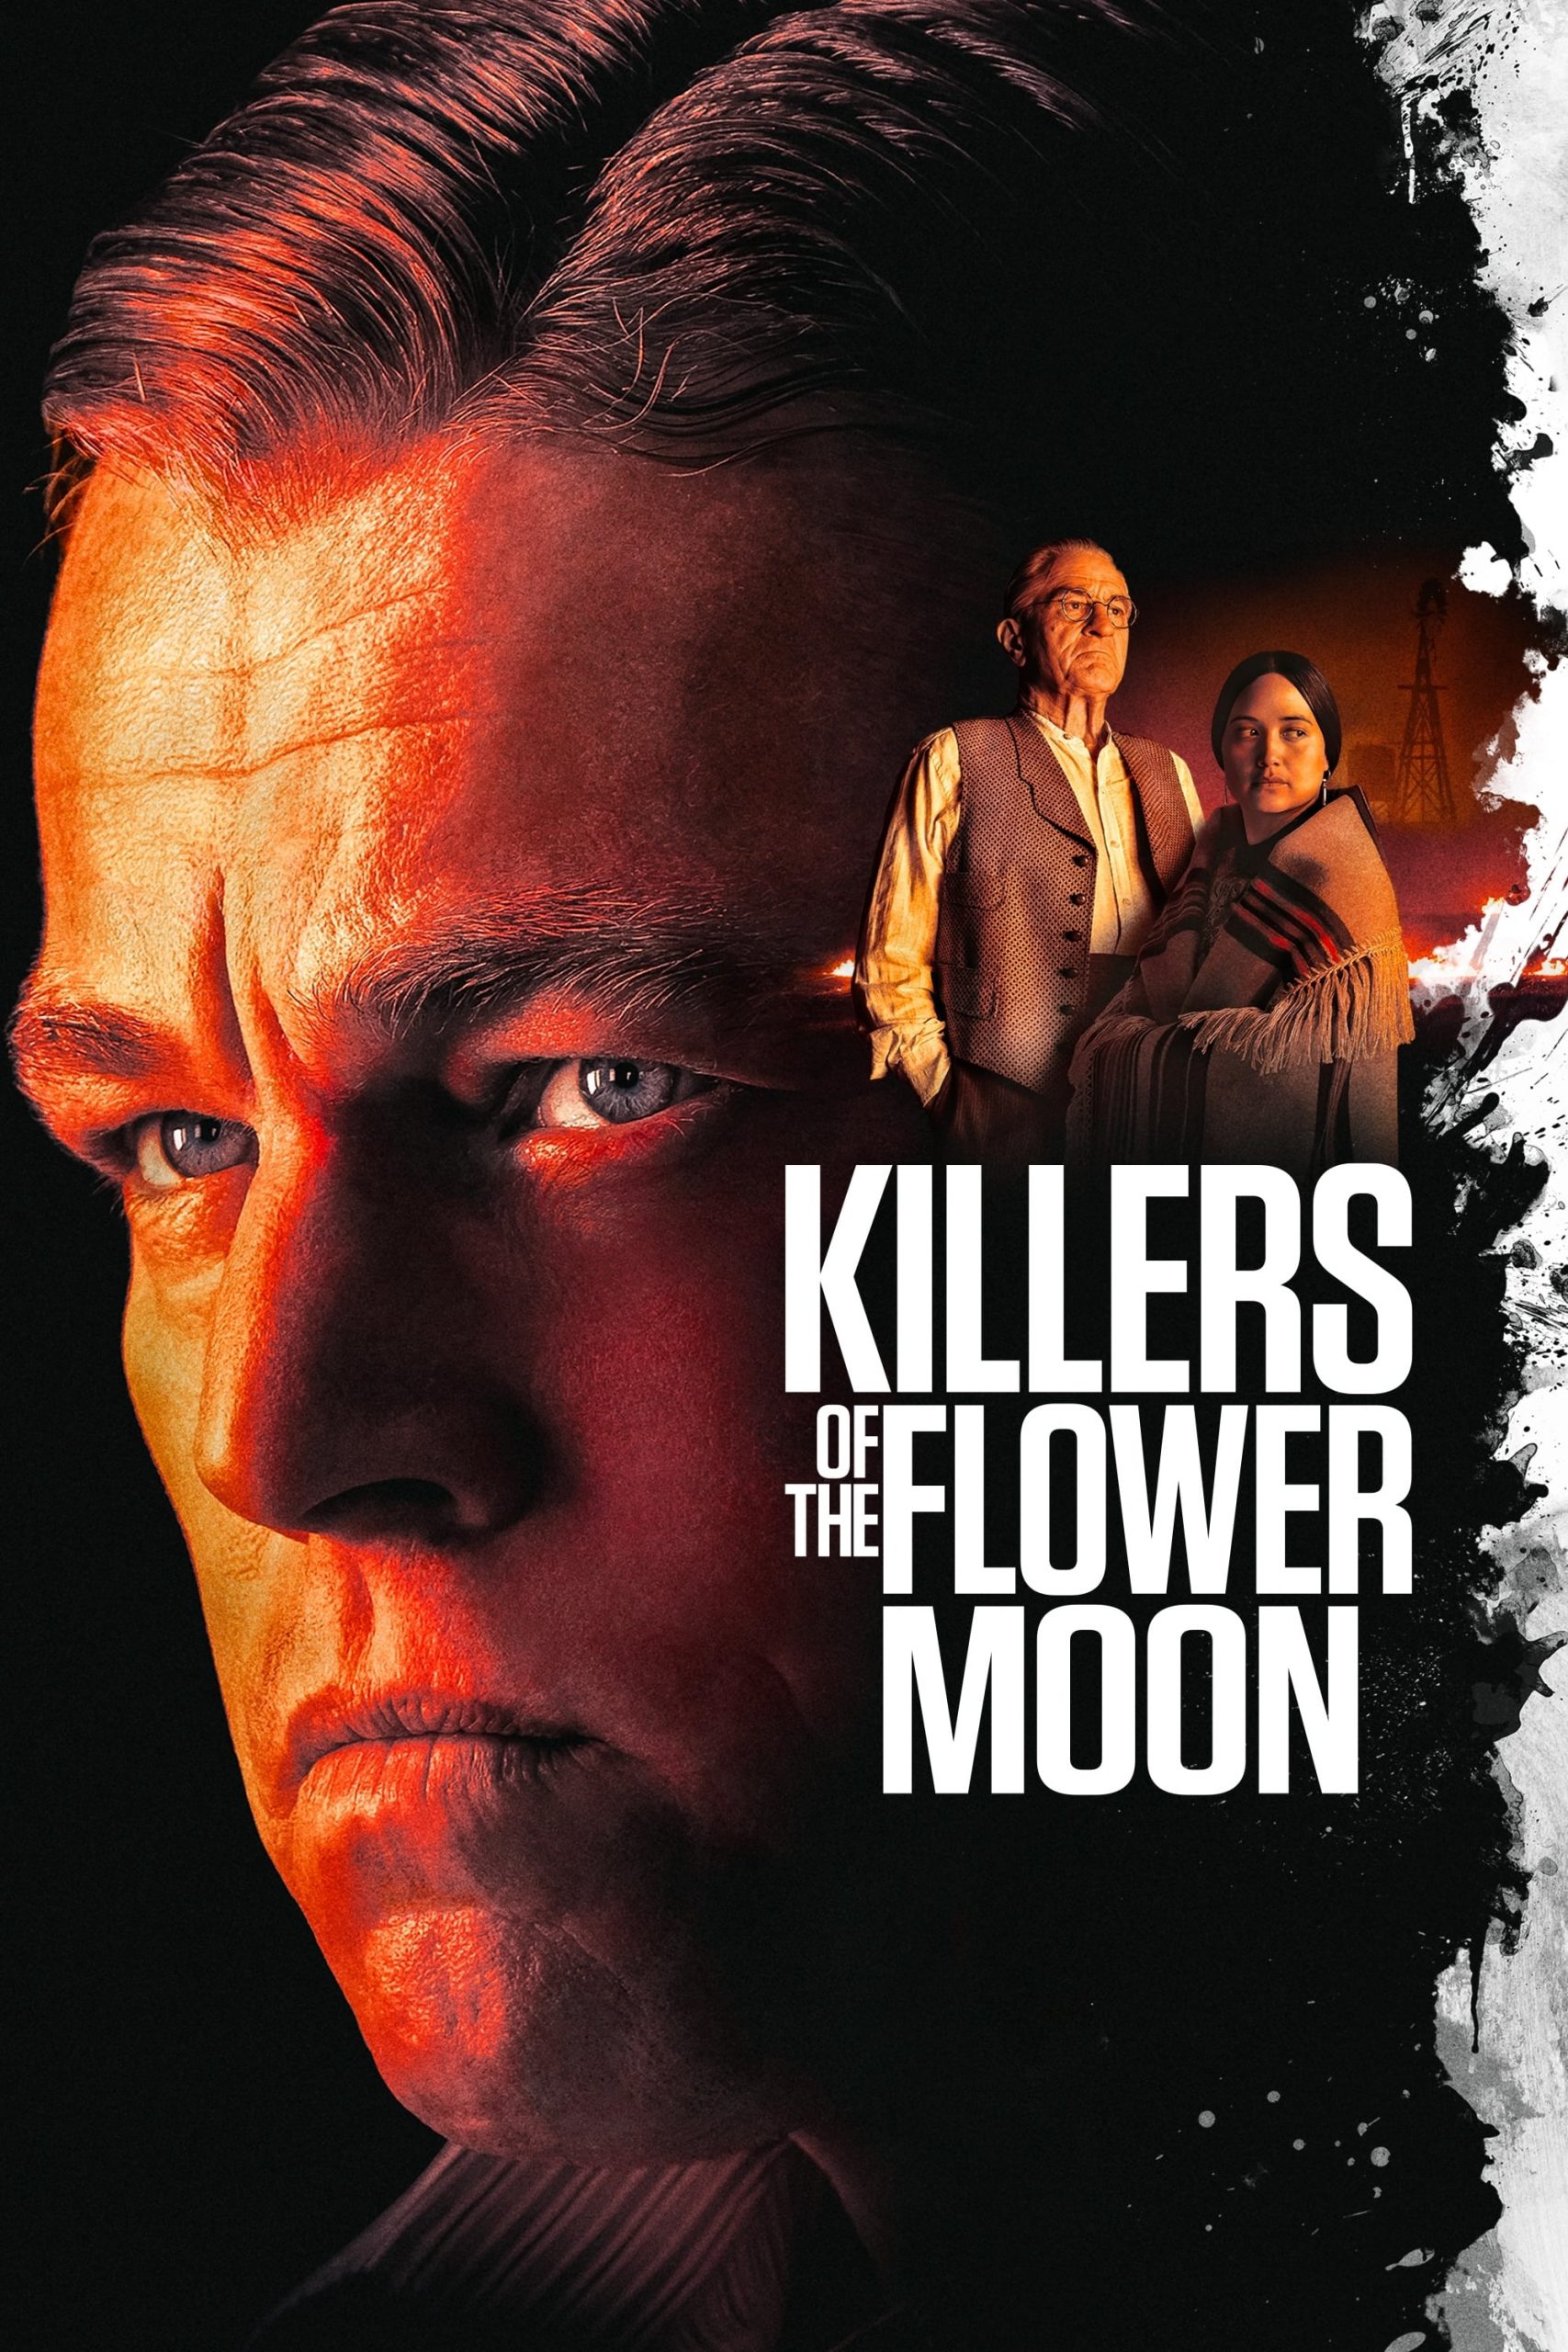 “Killers of the Flower Moon,” from Martin Scorsese, to premiere globally on Apple TV+ on Jan. 12